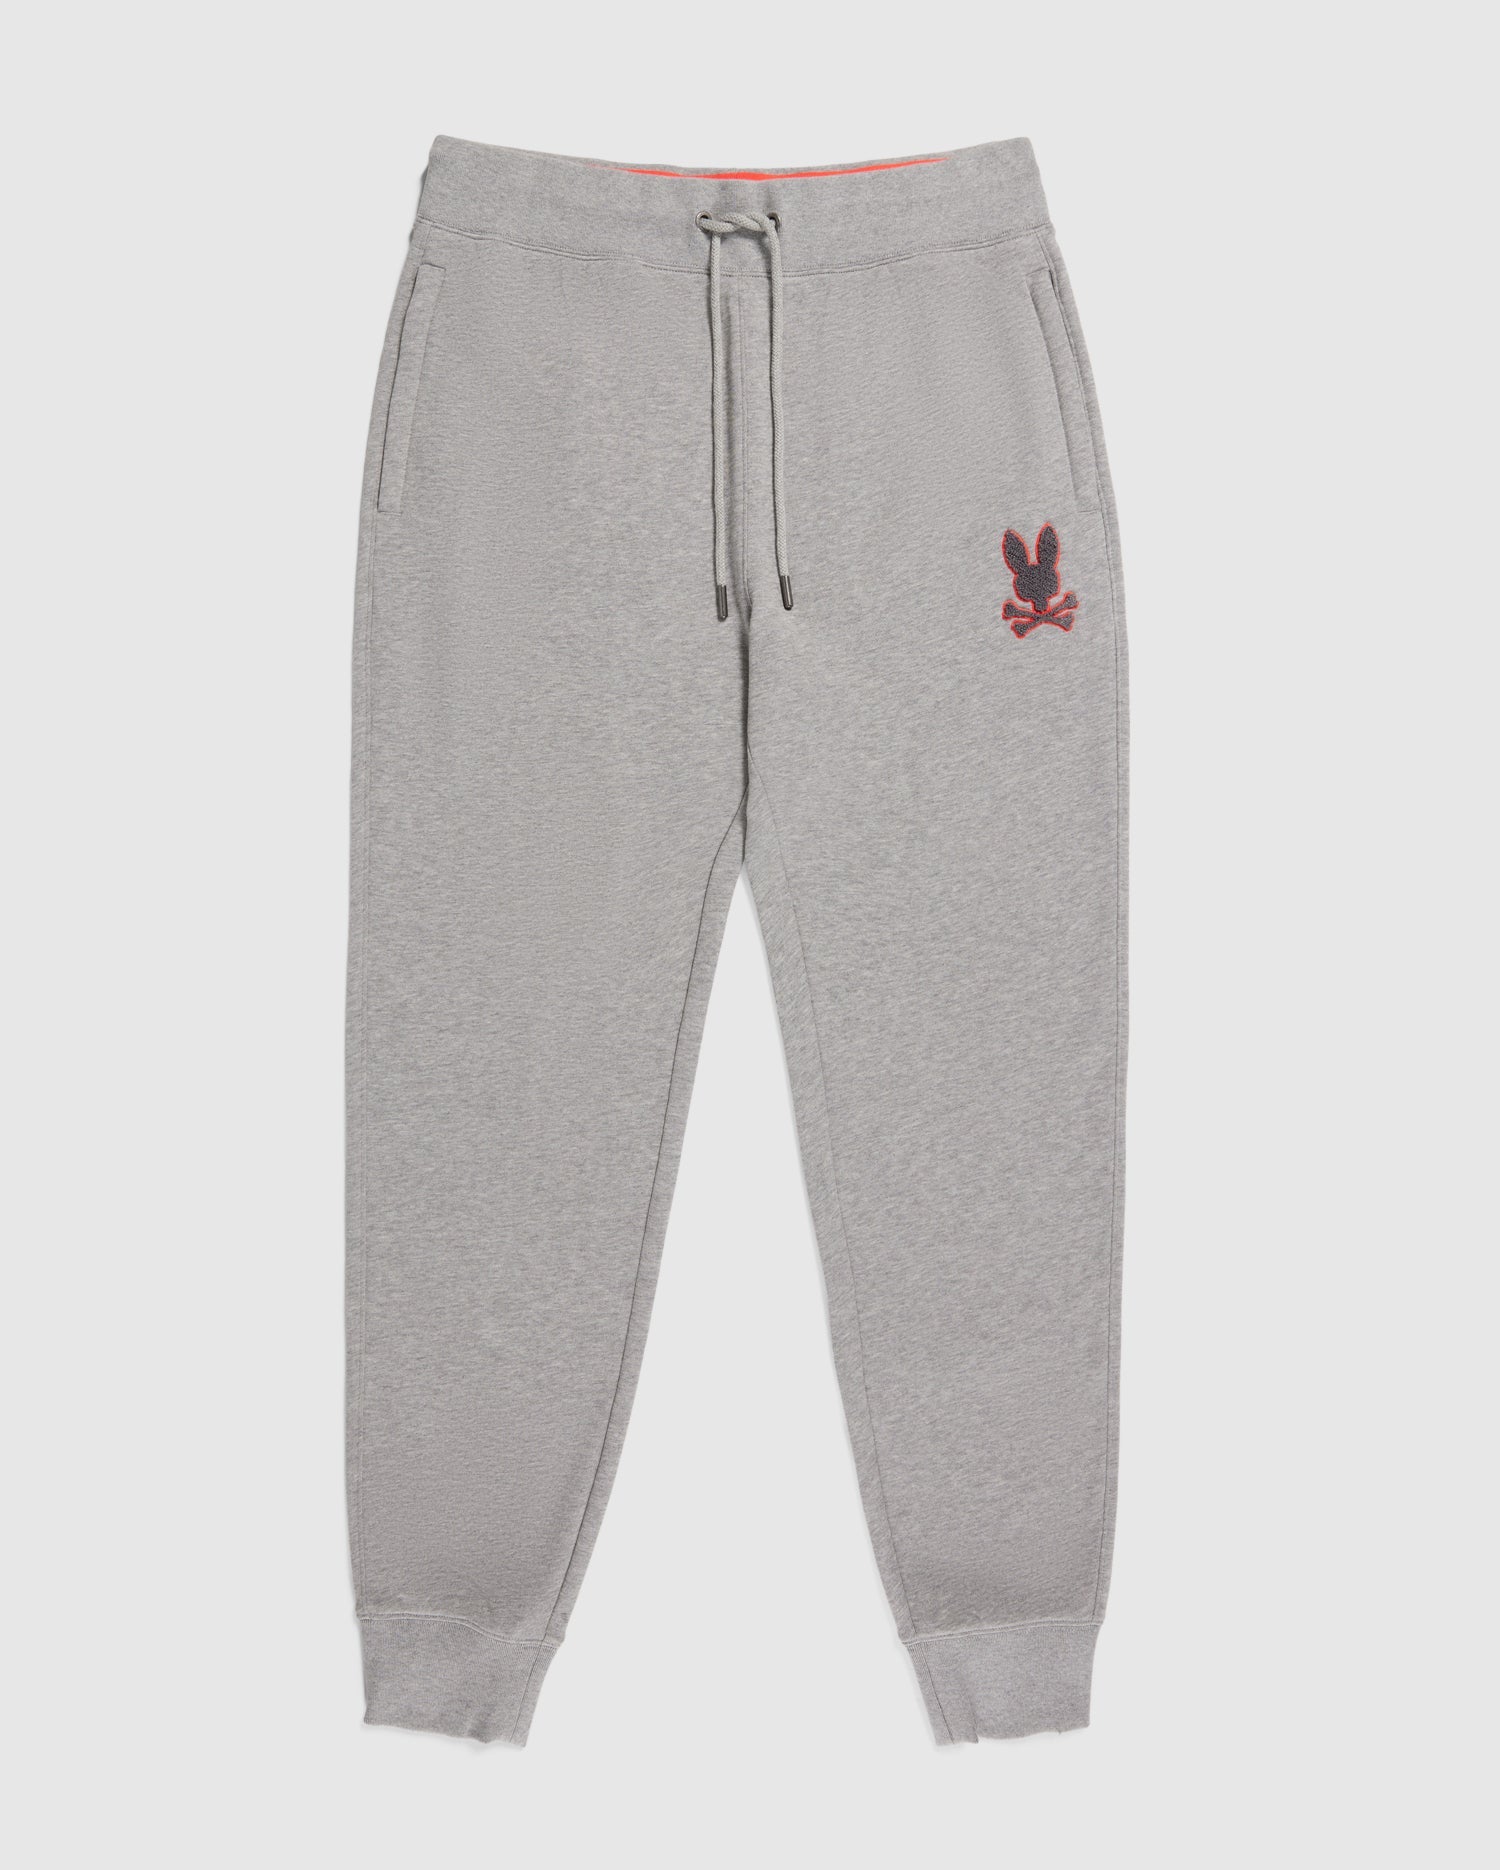 Psycho Bunny Sweatsuits Promo: Limited Time Offer – Page 4